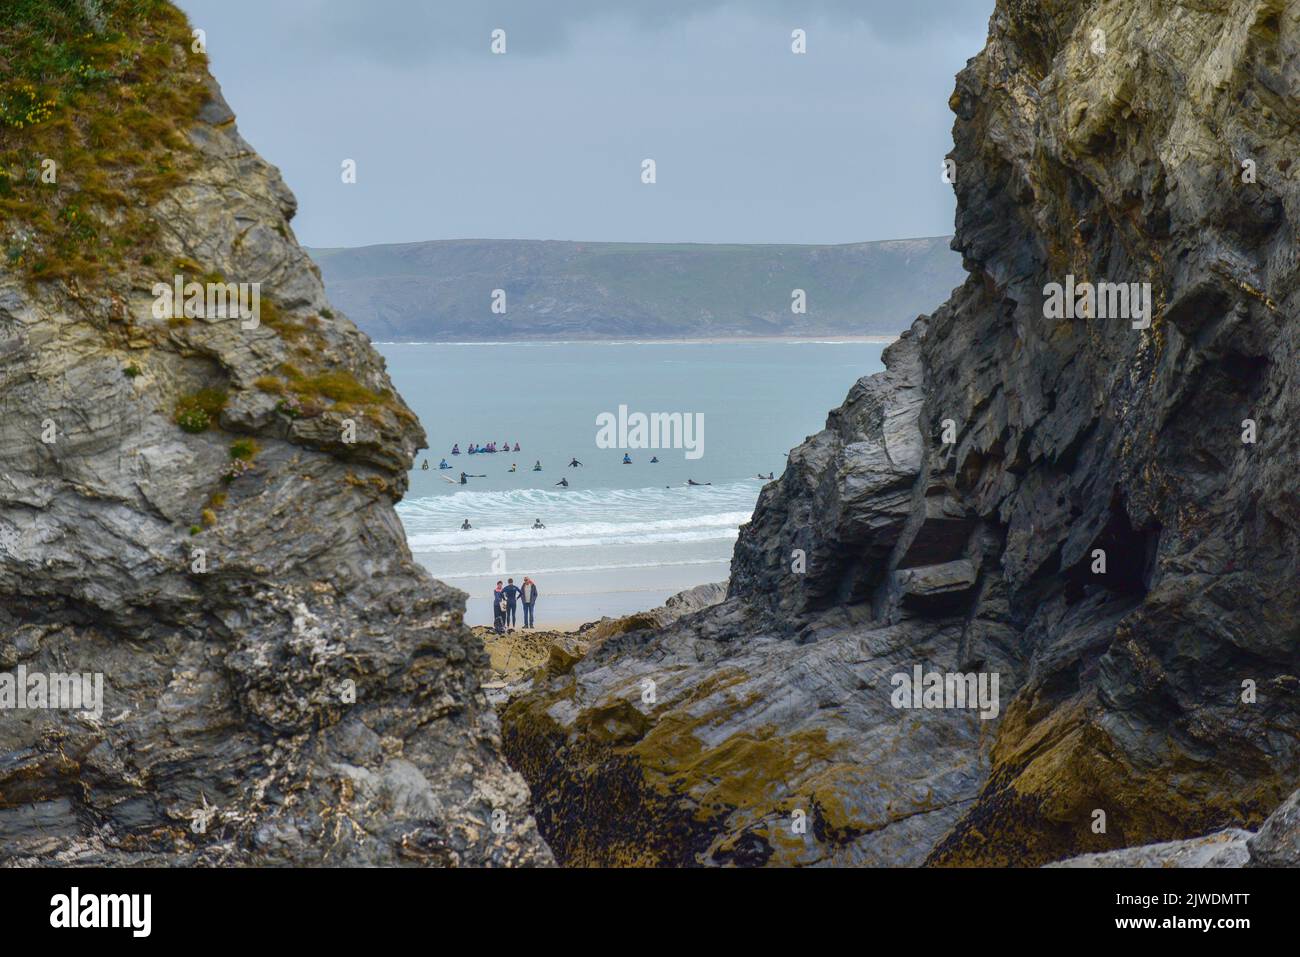 A distant view through a gap in the cliffs of surfers in the sea at Great Western Beach in Newquay in Cornwall in the UK. Stock Photo